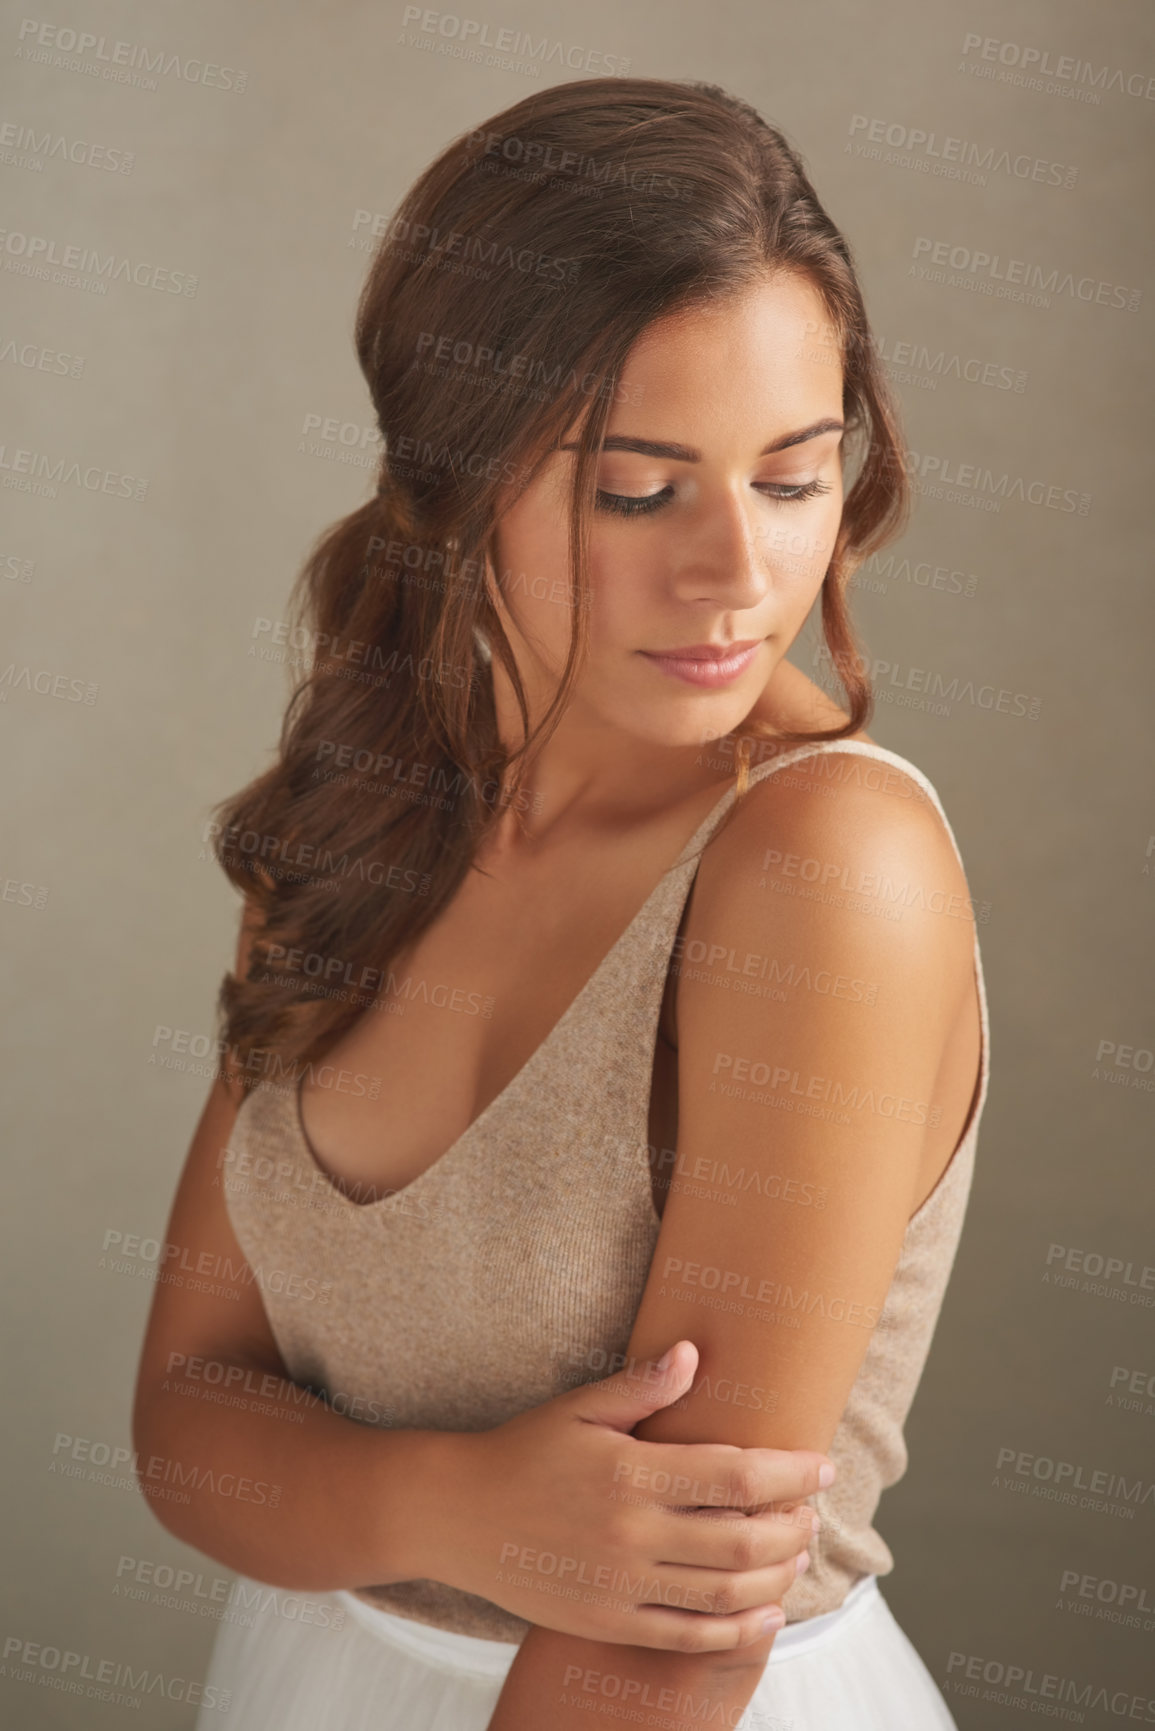 Buy stock photo Studio shot of an attractive young woman posing against a brown background